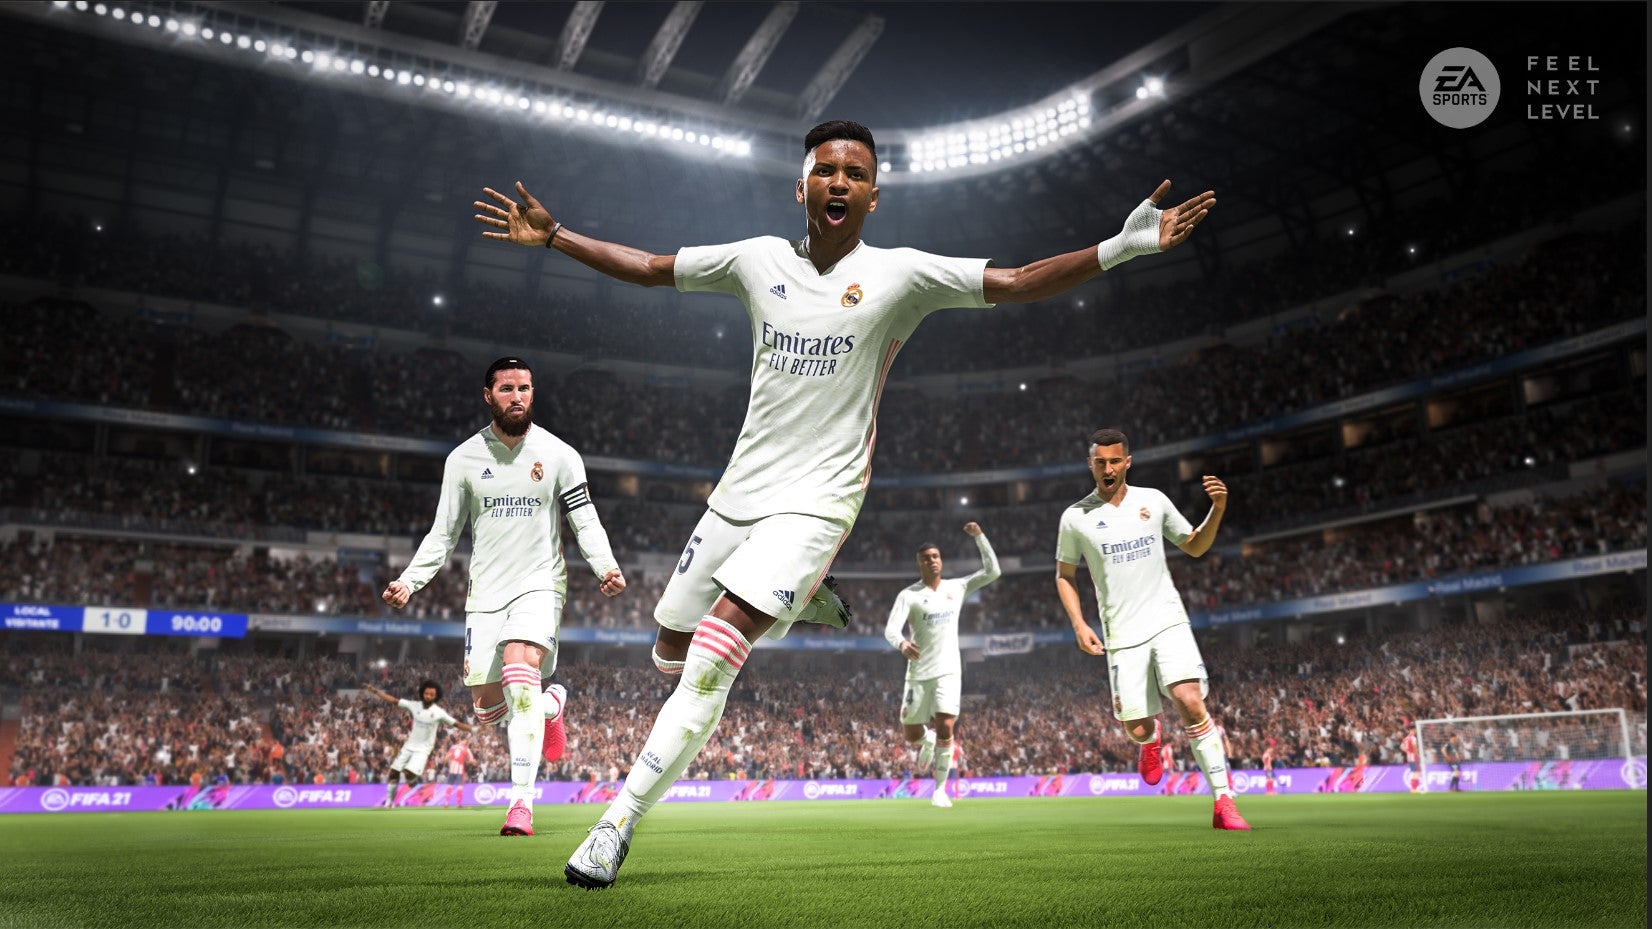 Image for FIFA 21 and GTA 5 were the most downloaded games on PlayStation in February